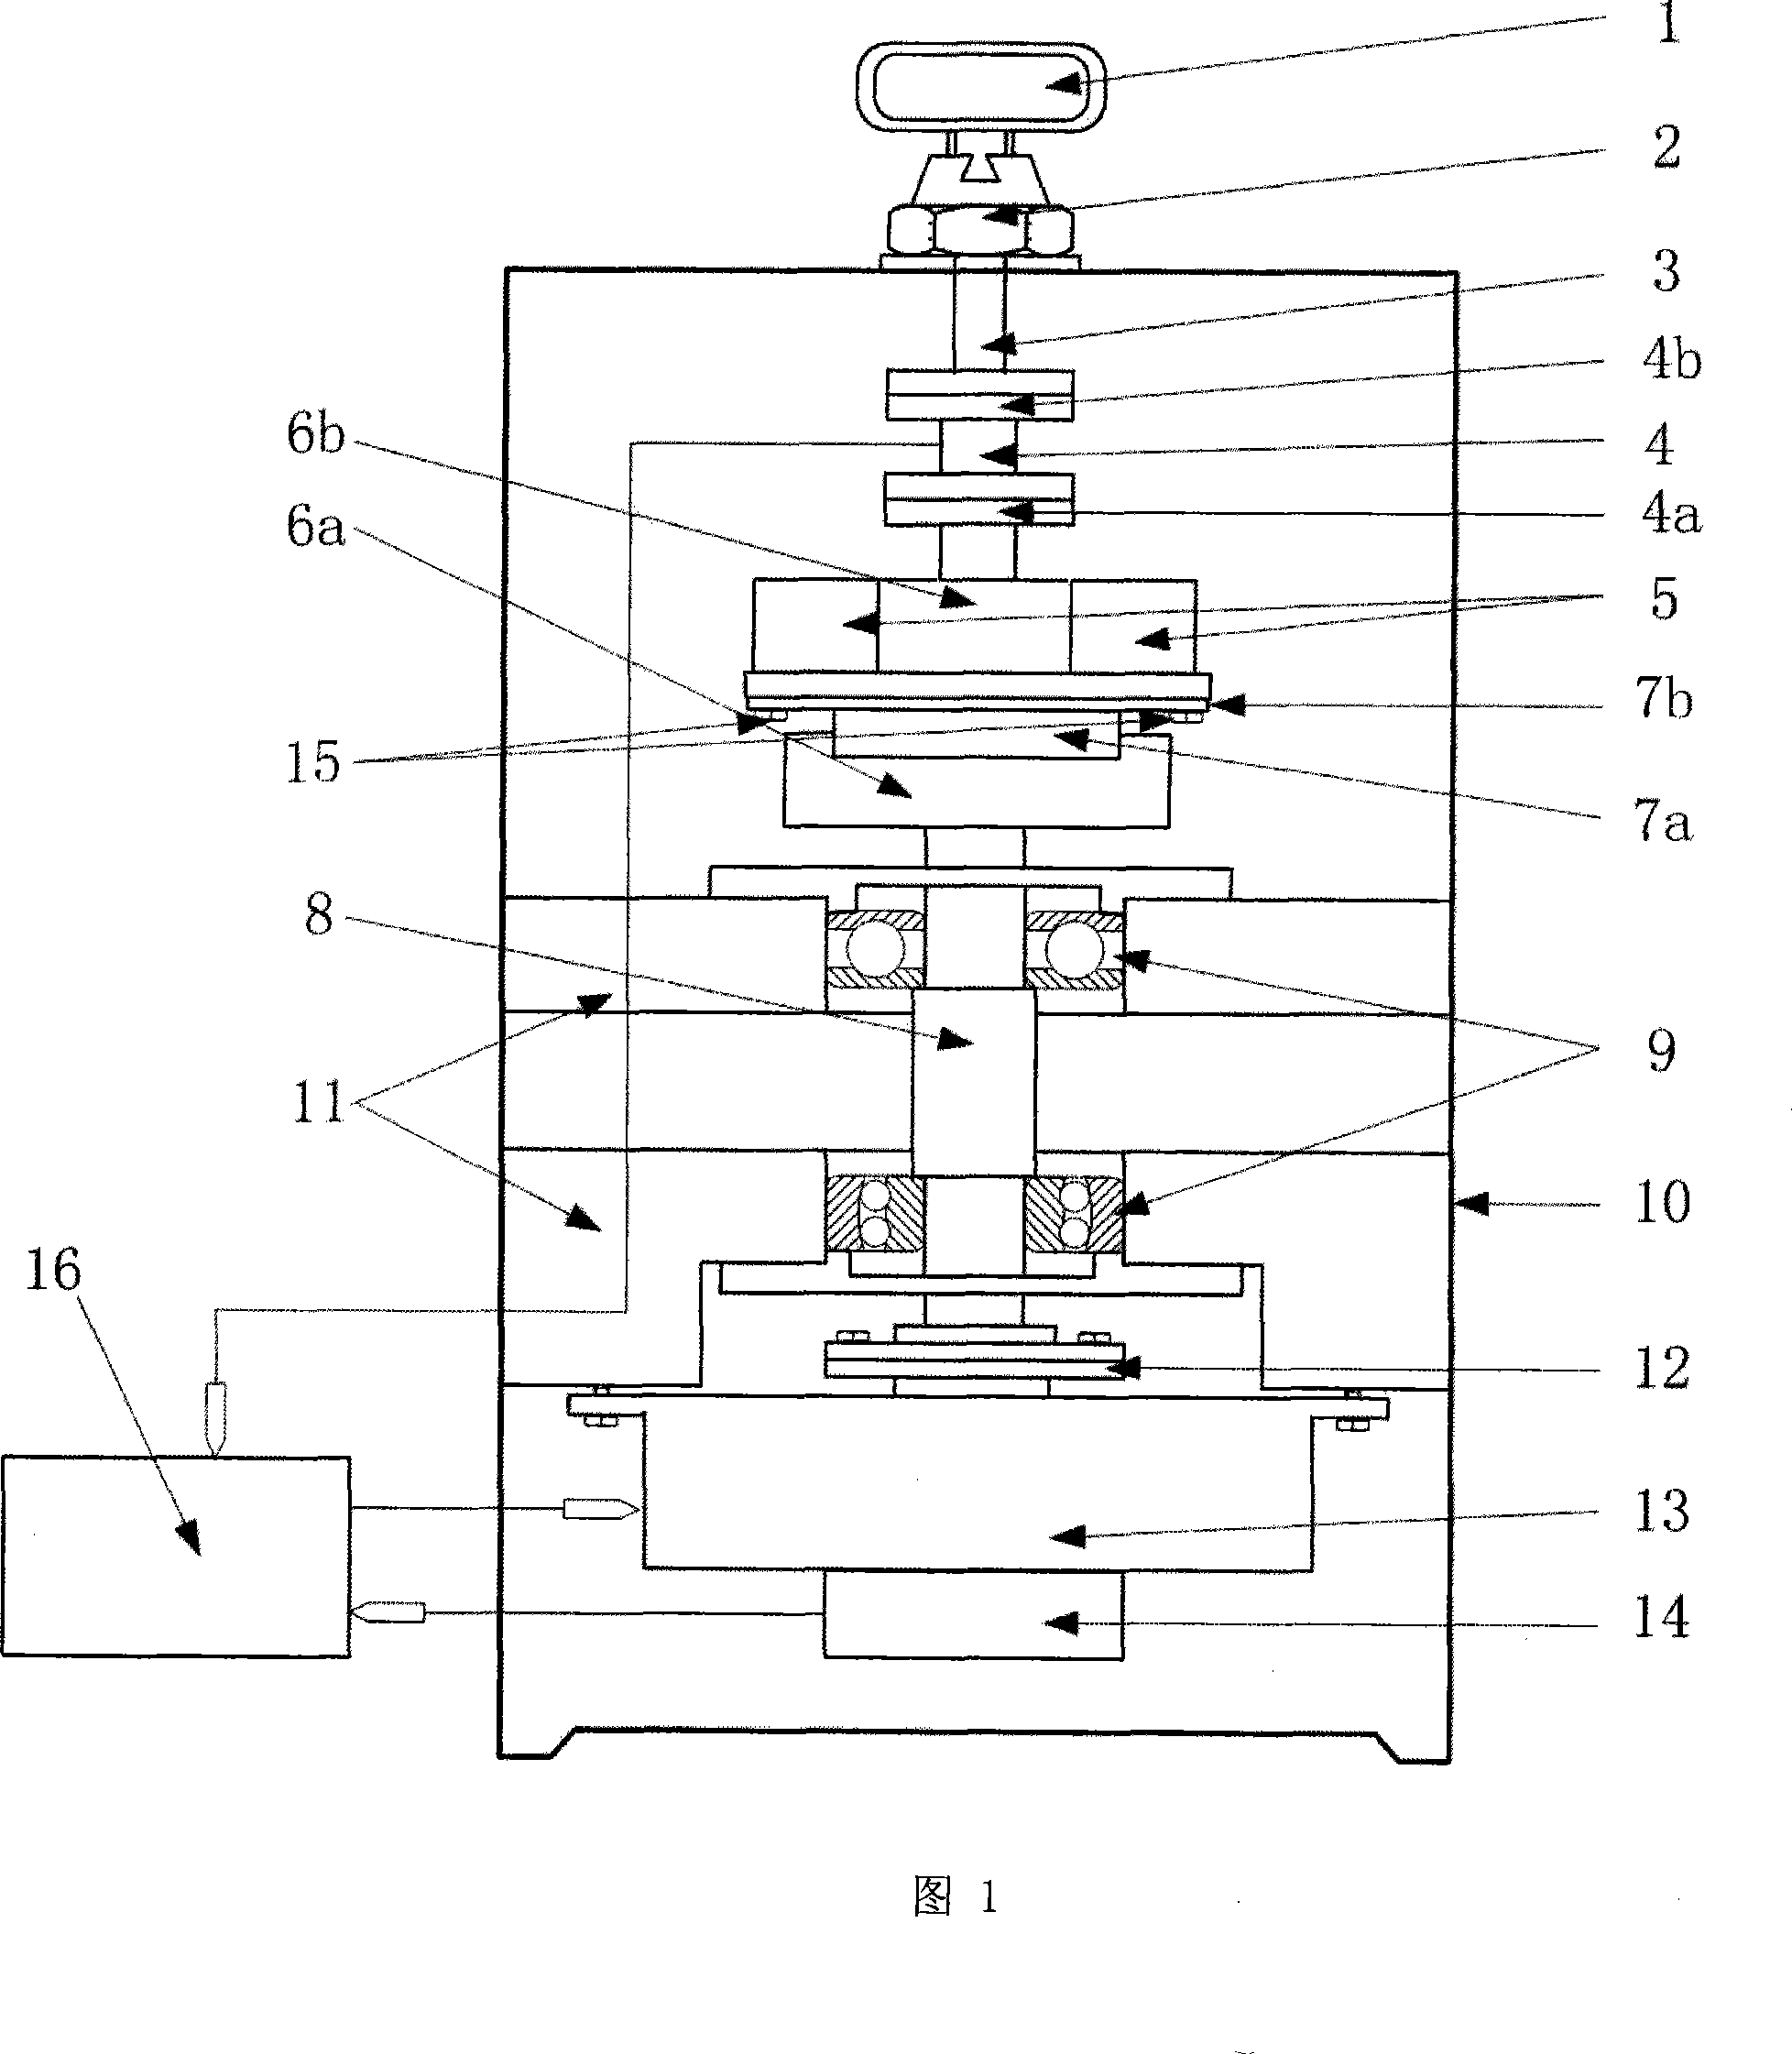 System and method for testing dynamic friction parameter